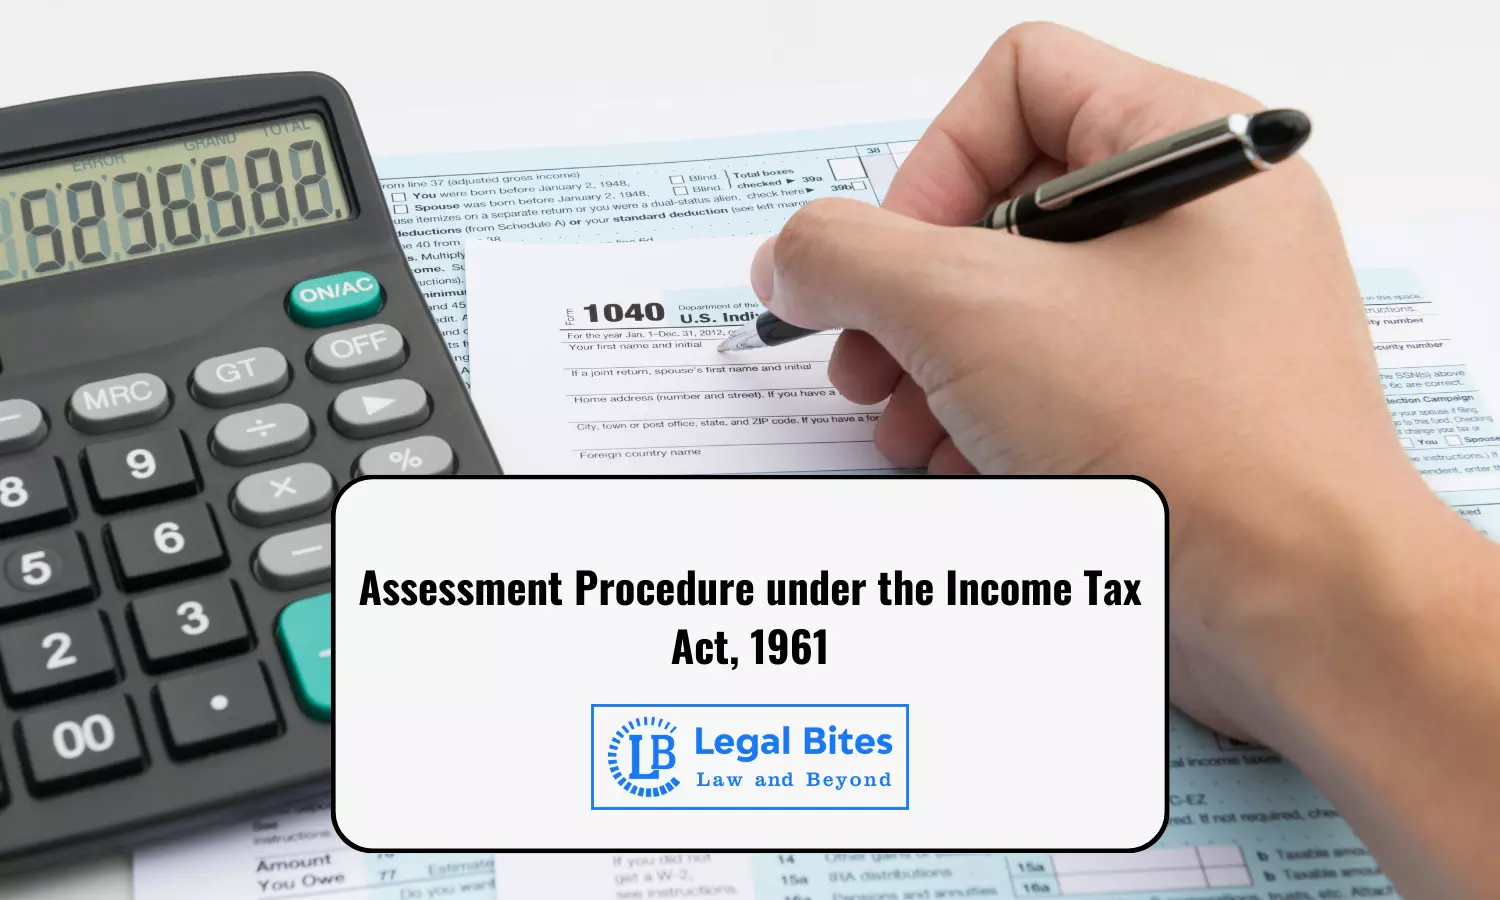 Assessment Procedure under the Income Tax Act, 1961